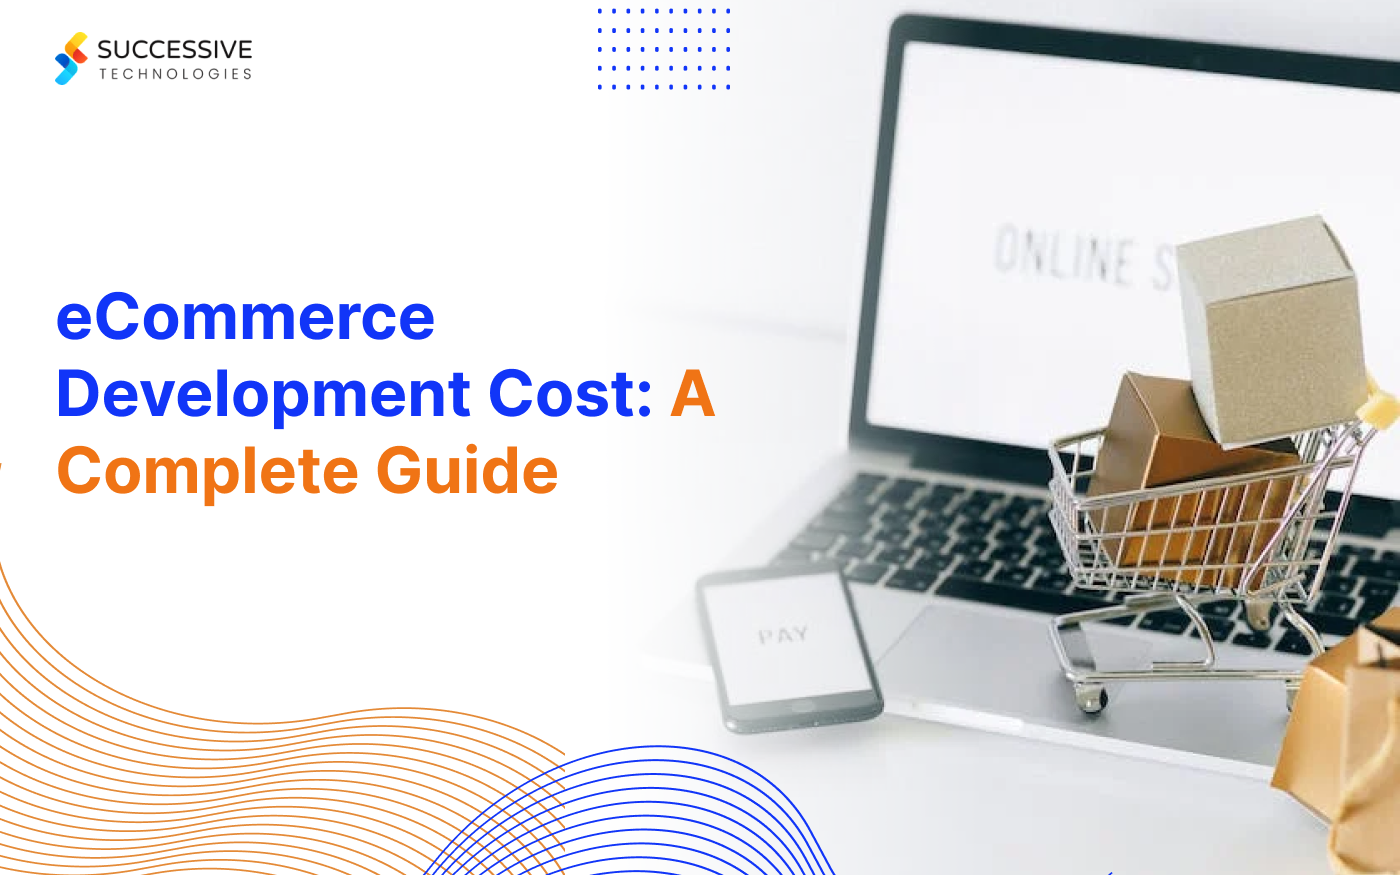 A Complete Guide on eCommerce Store Development Cost